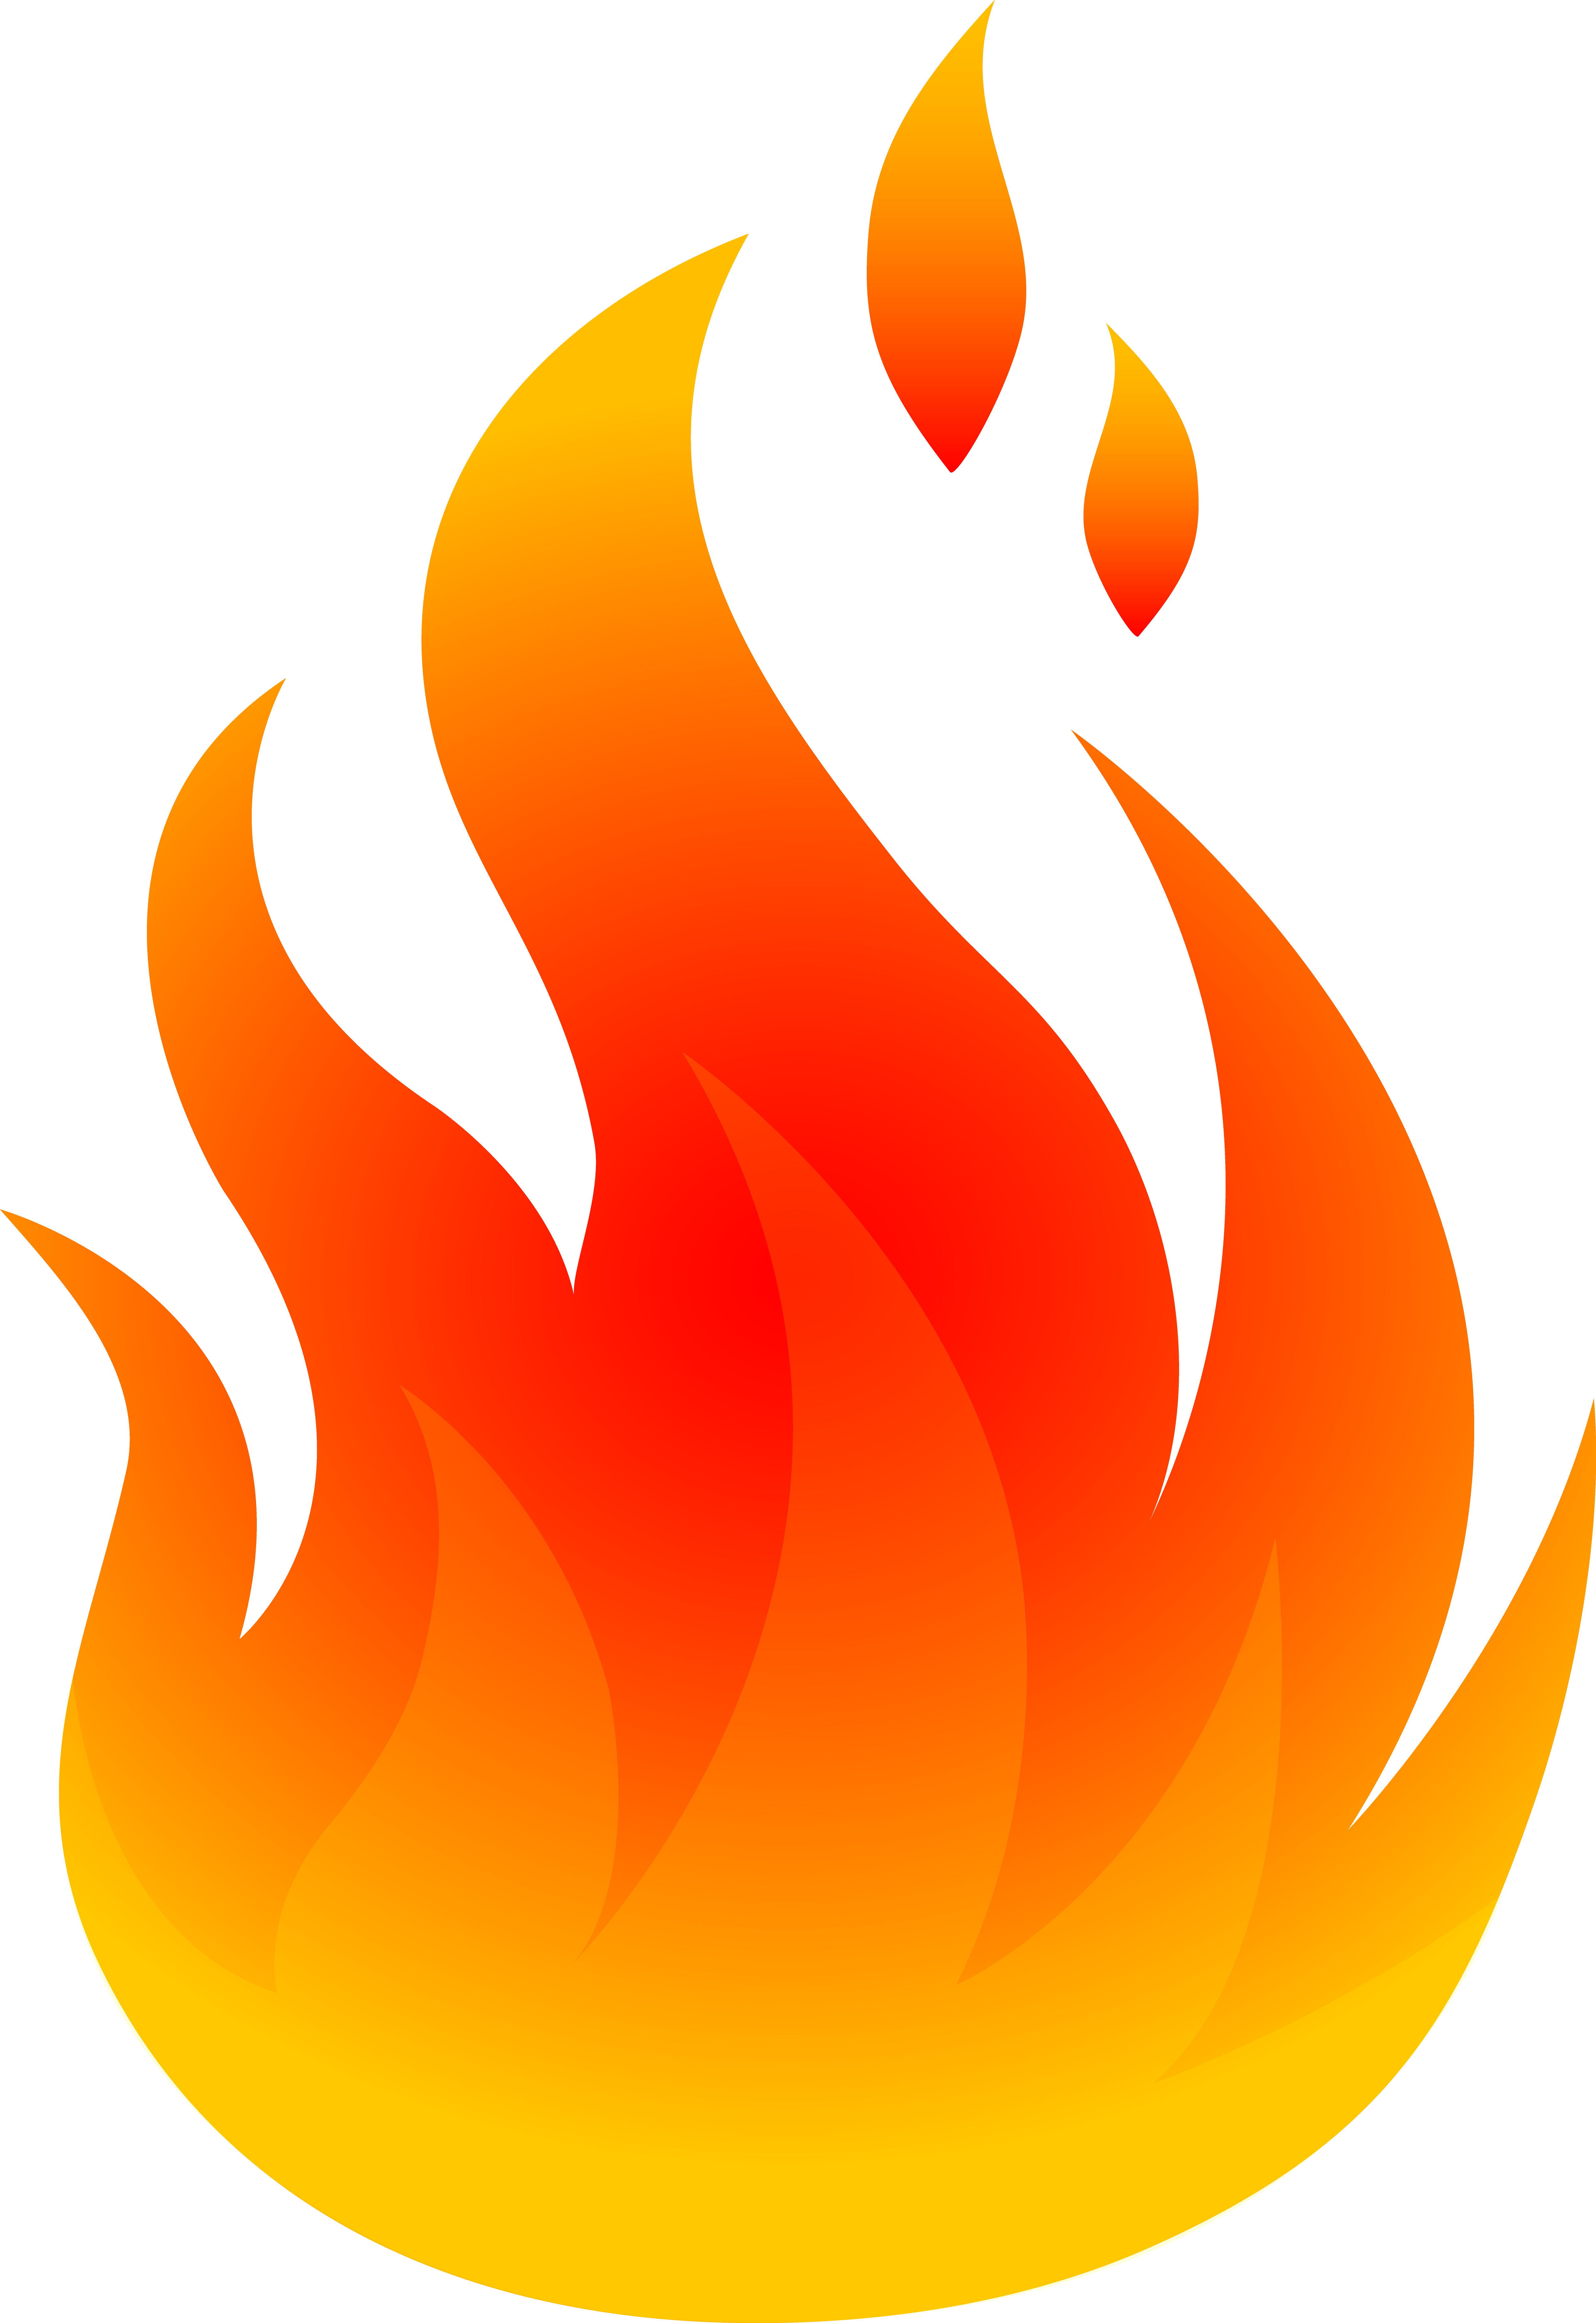 This pin describes an. Clipart volleyball flame